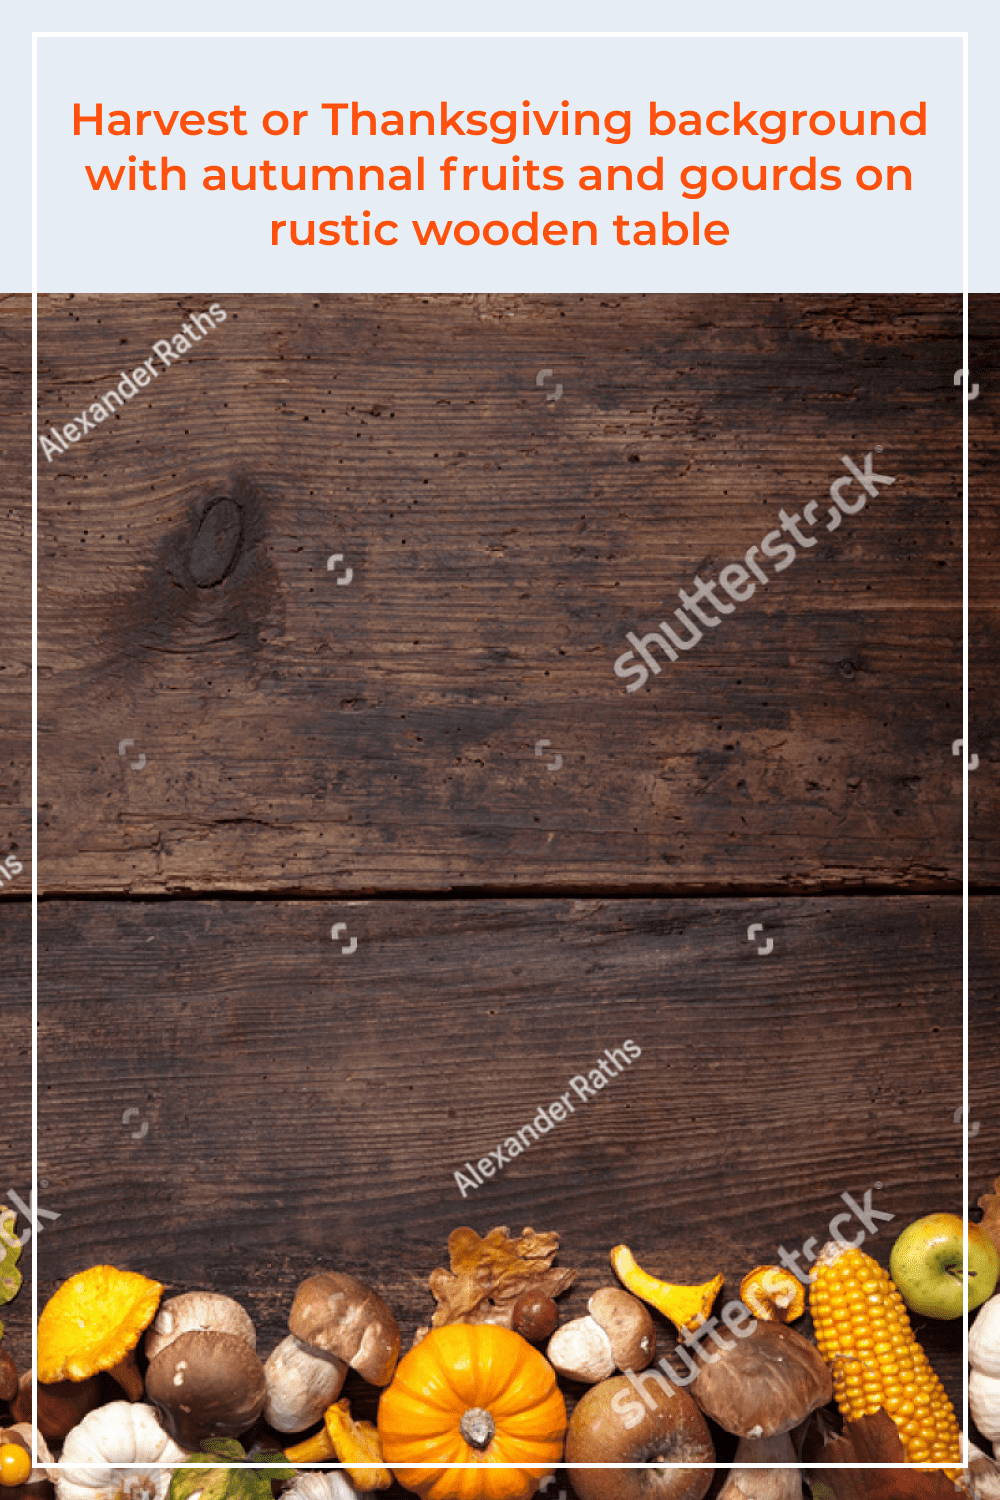 Harvest or Thanksgiving background with autumnal fruits and gourds on rustic wooden table.